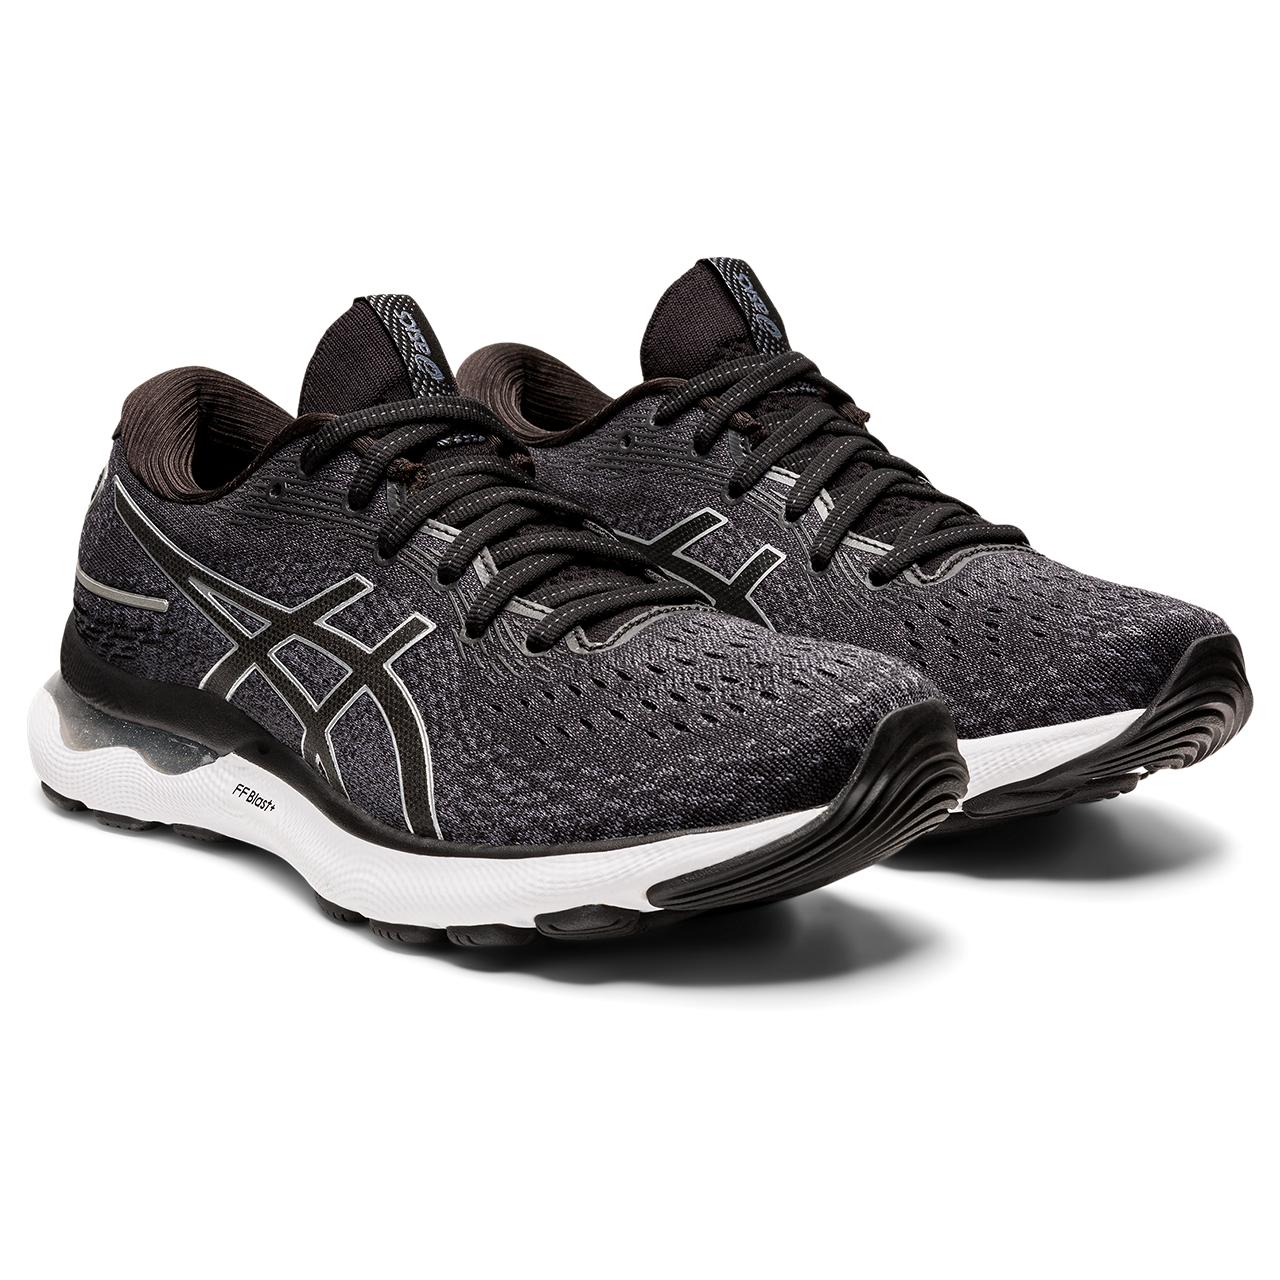 The Women's Nimbus 24 is one of the classics from ASICS. It's been one of the best-selling cushioned neutral shoes for many years and will no doubt continue that trend with version 24. Women's Gel-Nimbus 24 - Wide "D" This is the wide version of the Black and White colorway.